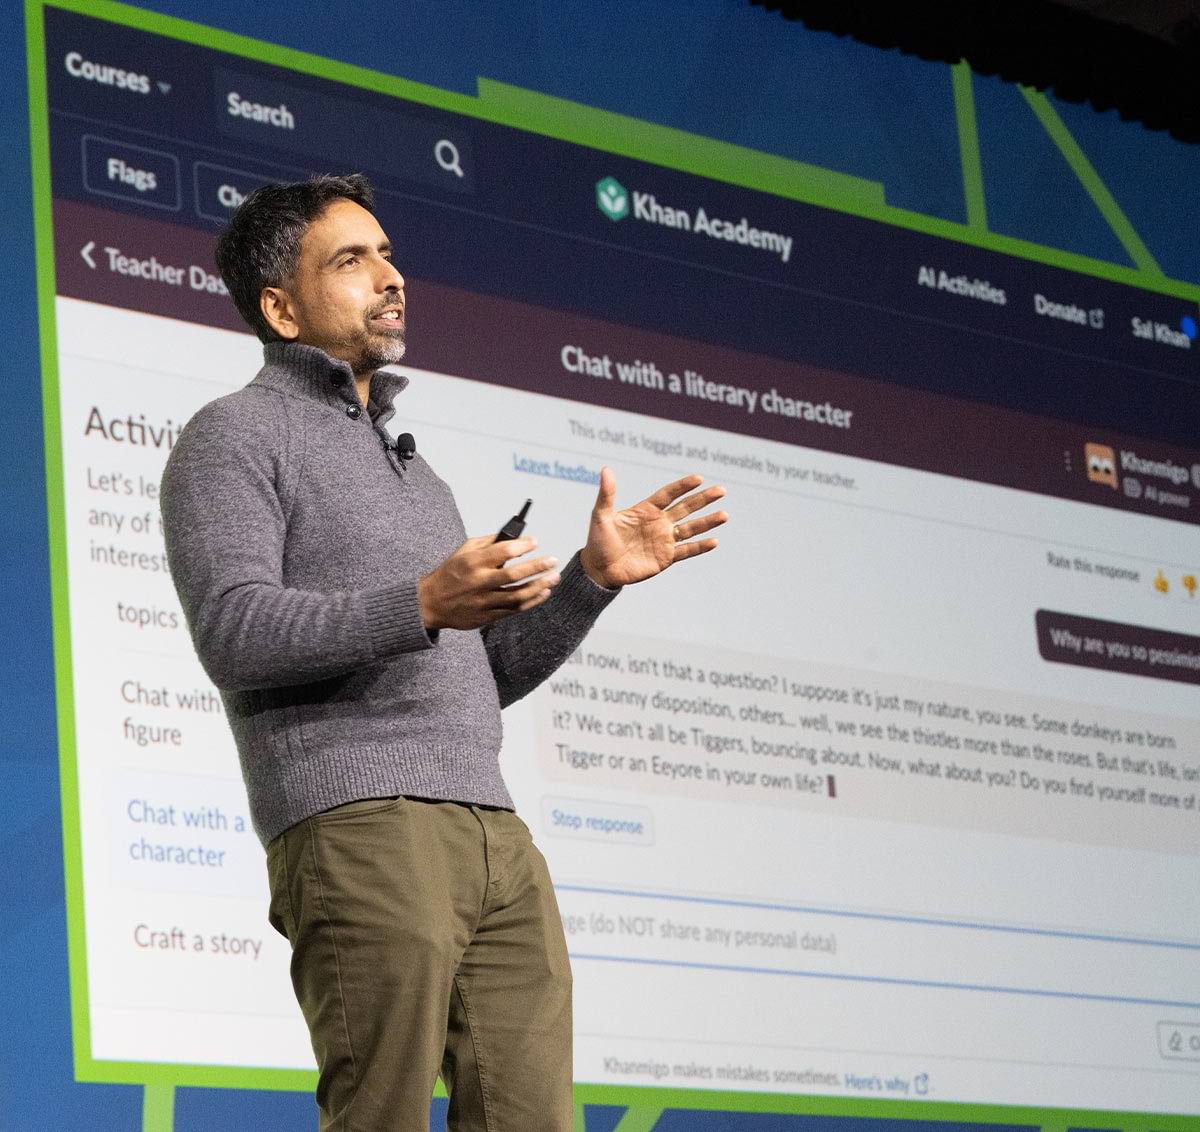 Khan Academy Founder Sal Khan stands on stage controlling a presentation screen while addressing 2023 AEC Second General Session audience